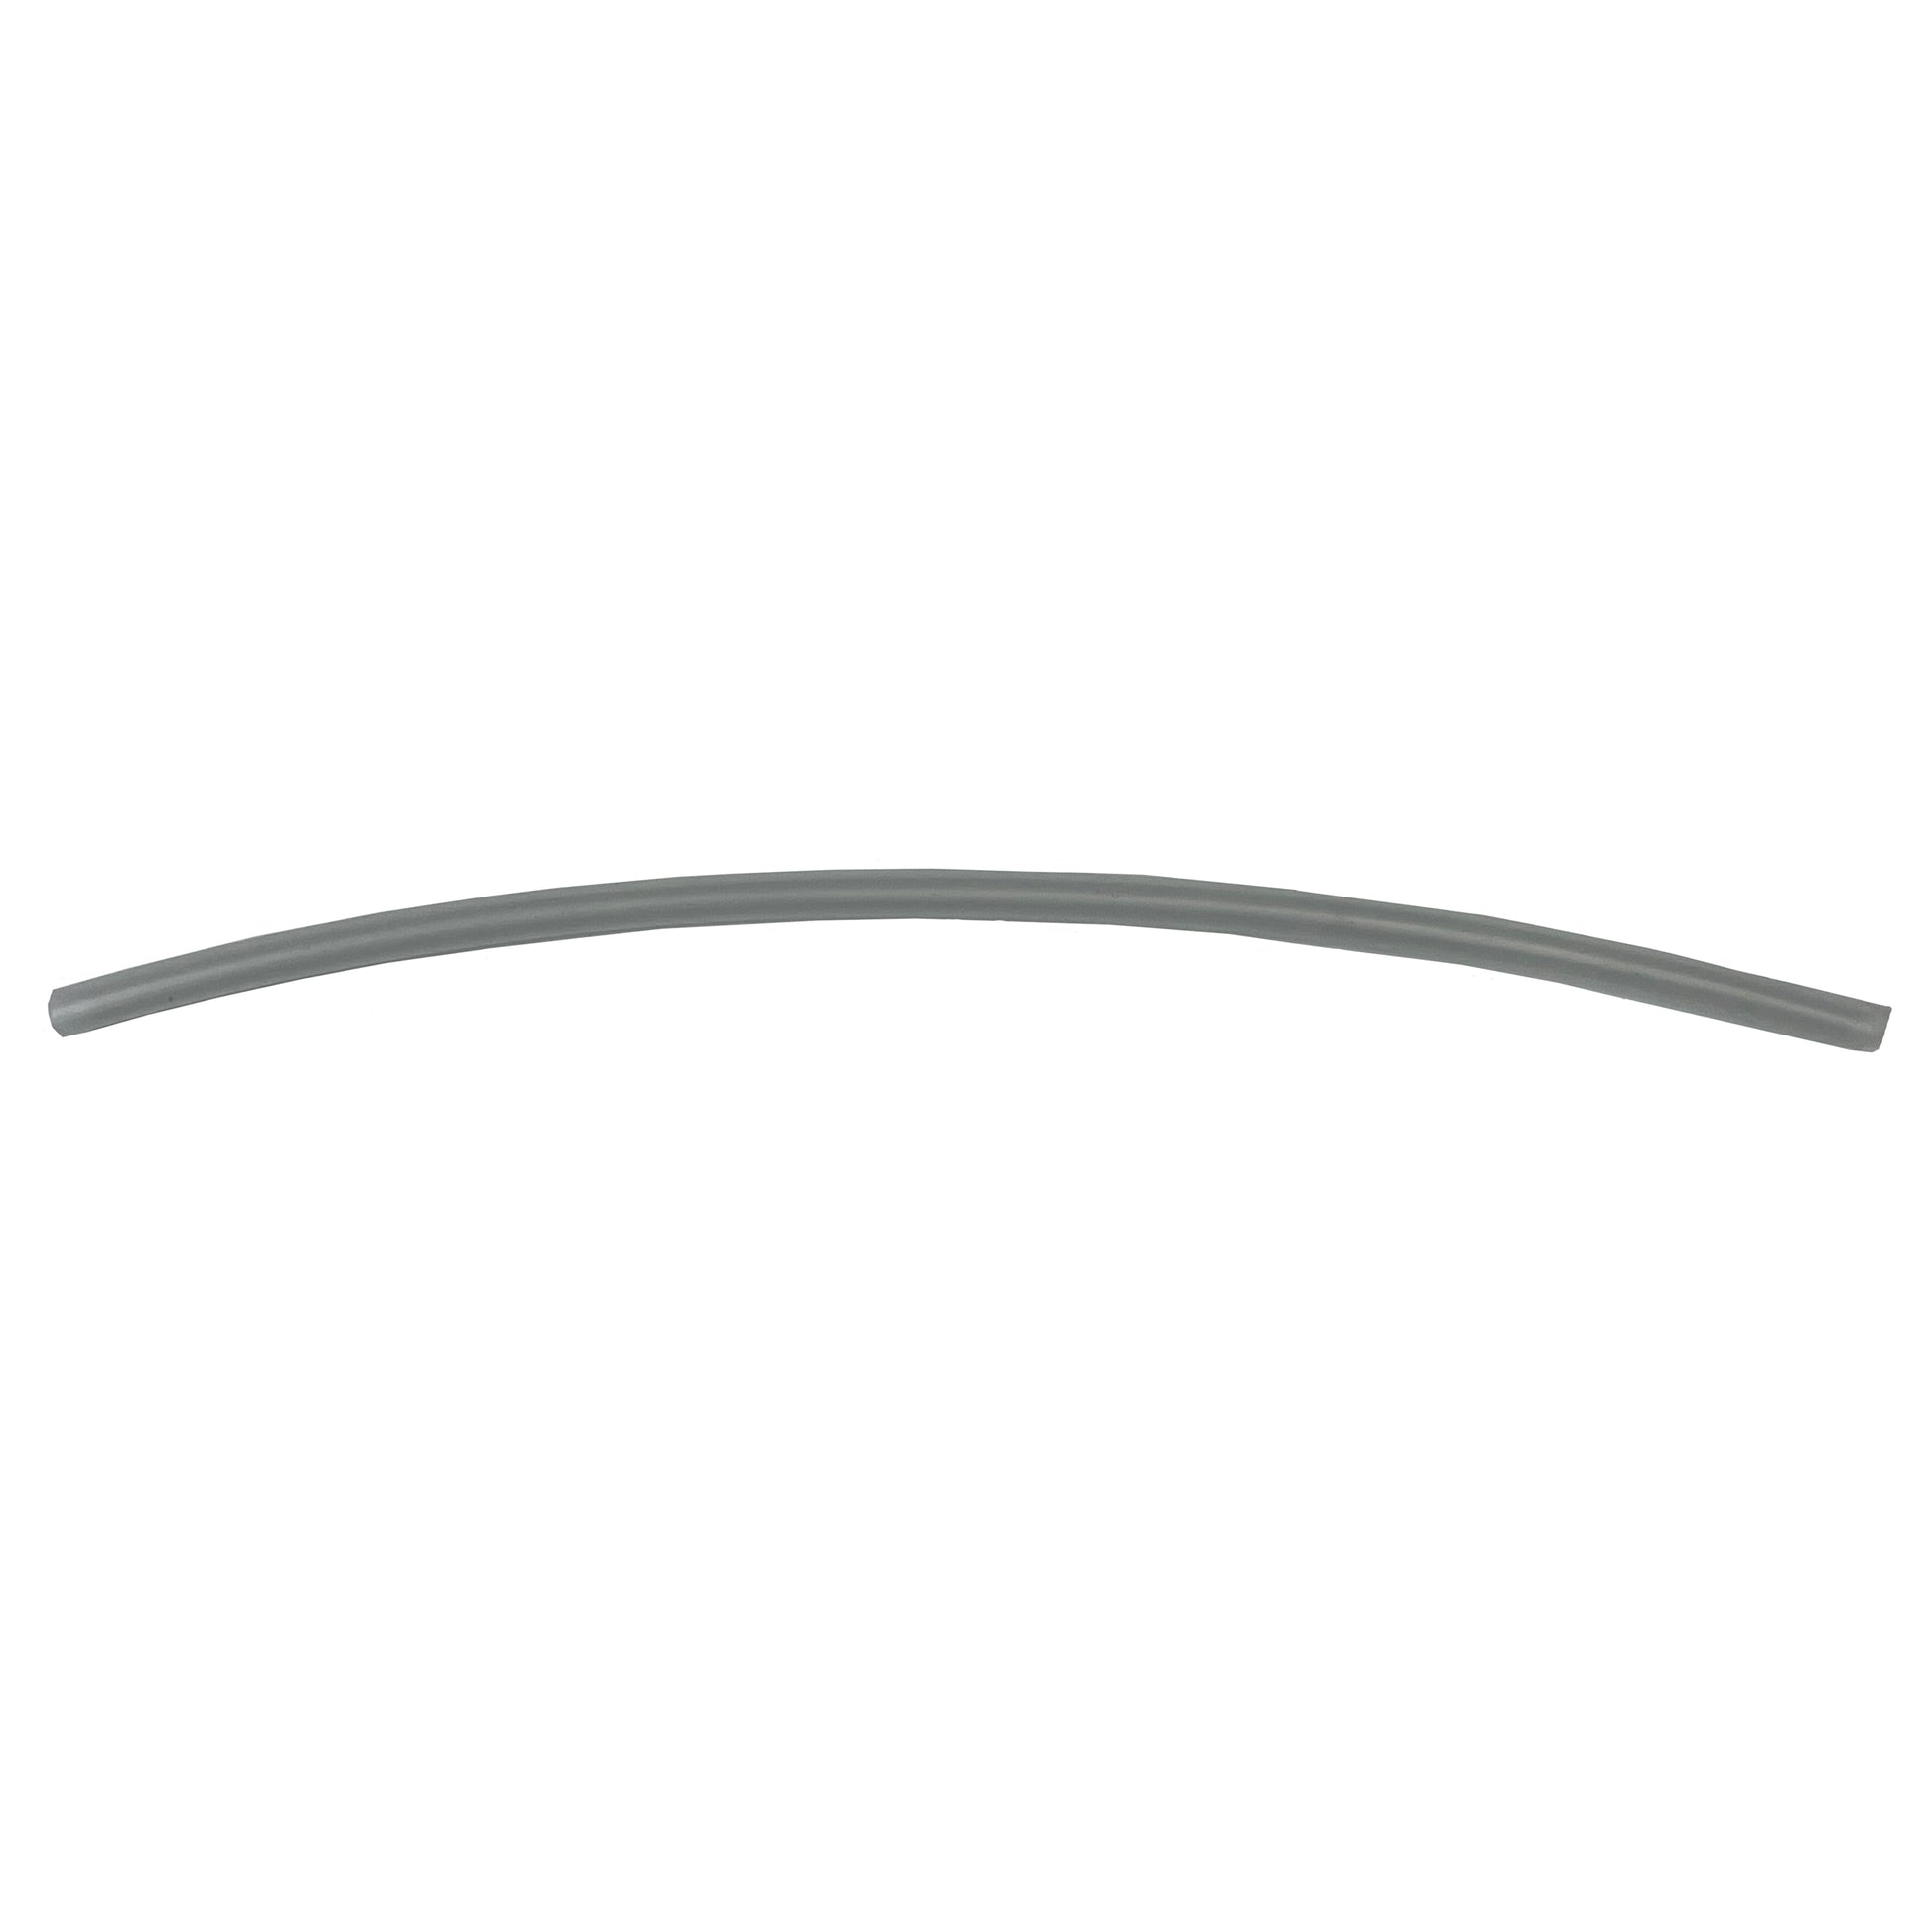 Flexible Thin Single Wall Non-Adhesive Heat Shrink Tubing 2:1 Clear 1/8" ID - 48" Inch 4 Pack